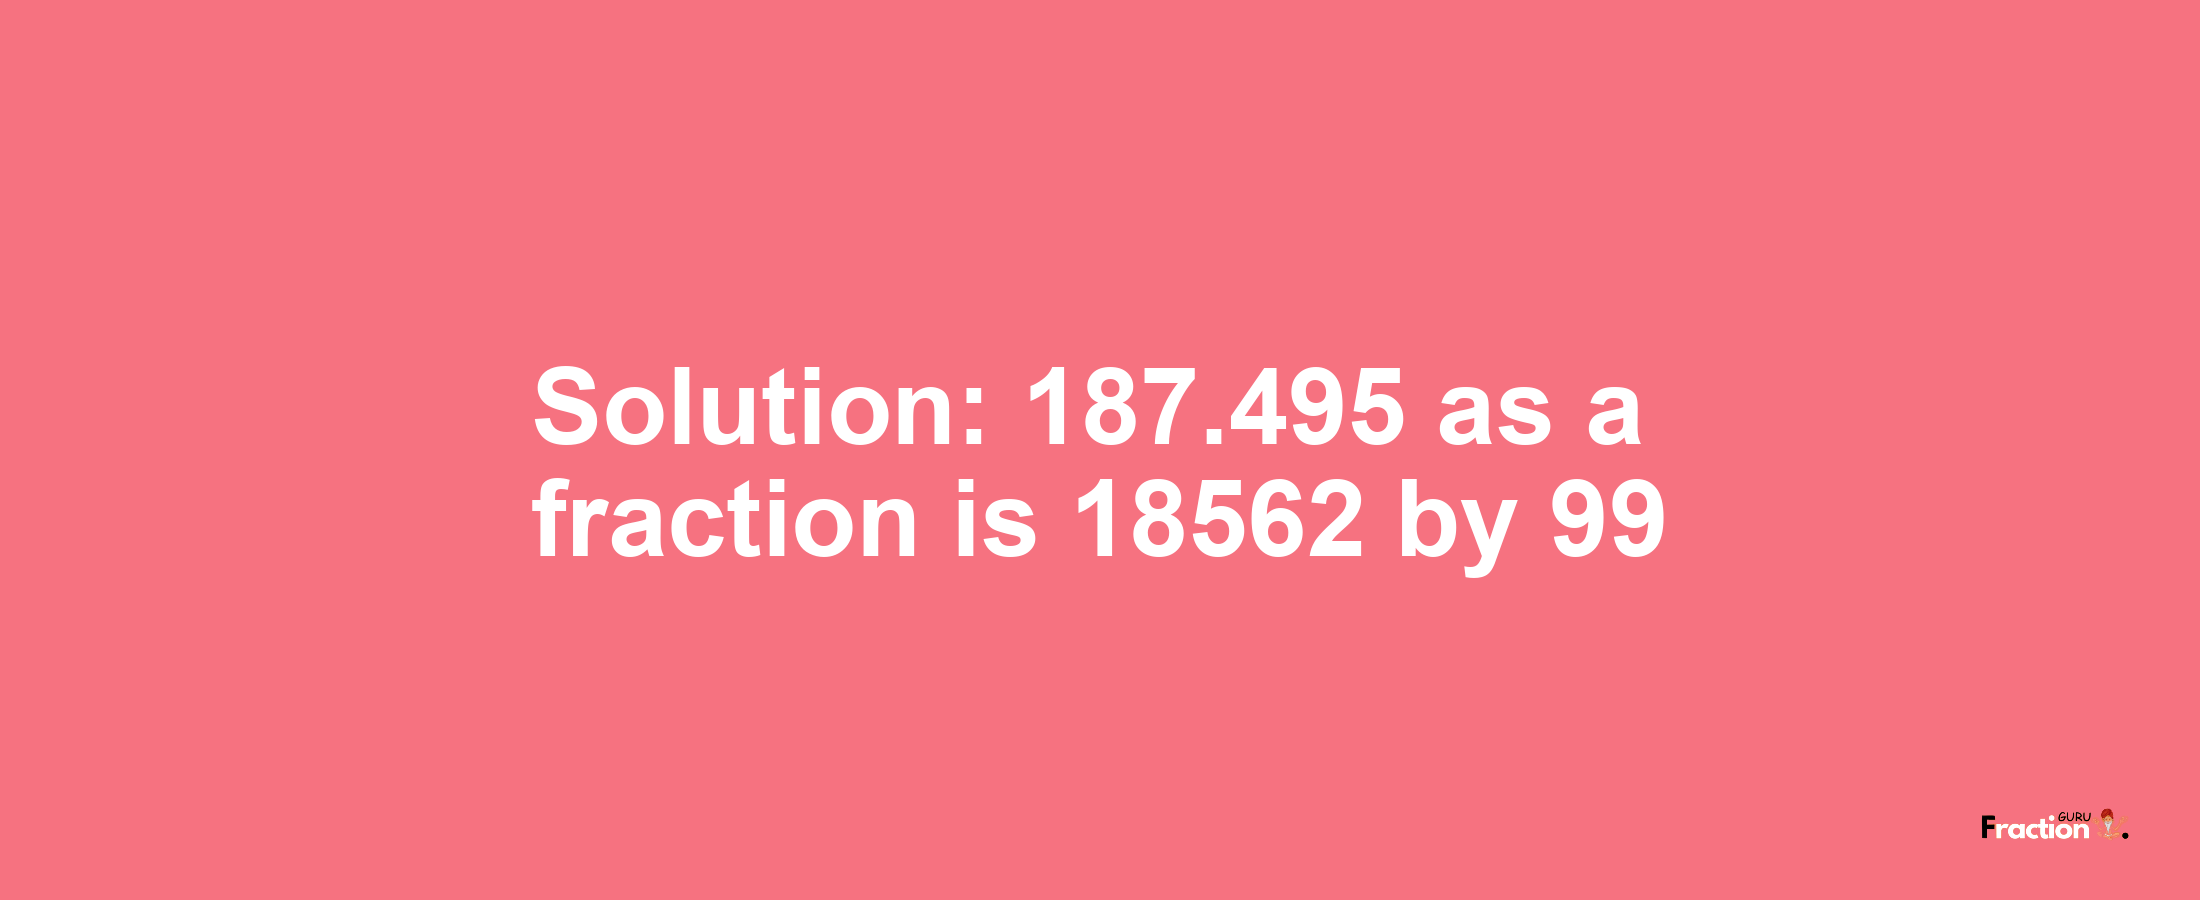 Solution:187.495 as a fraction is 18562/99